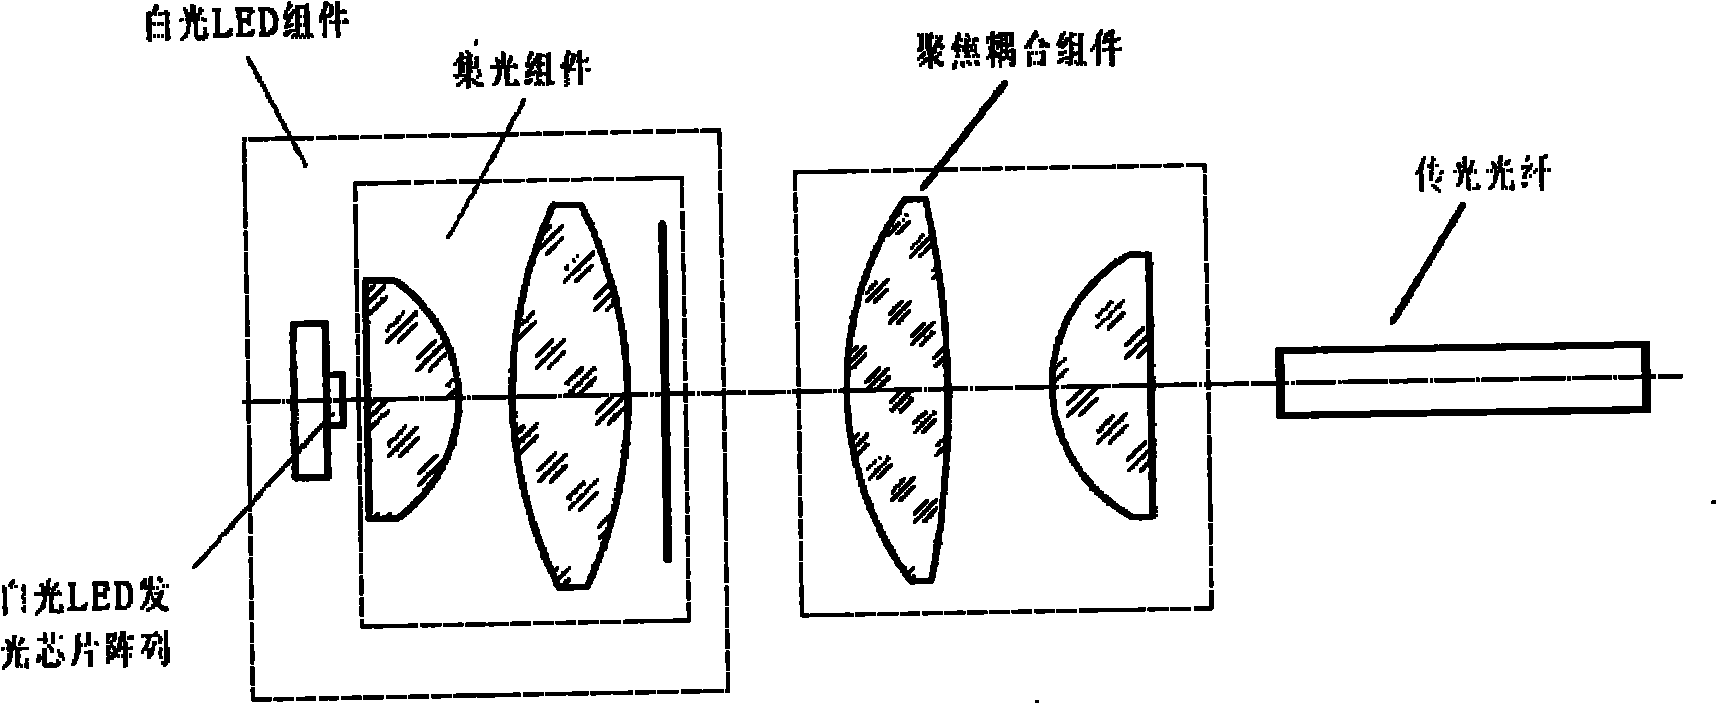 LED illumination light source device using LED complementary color light